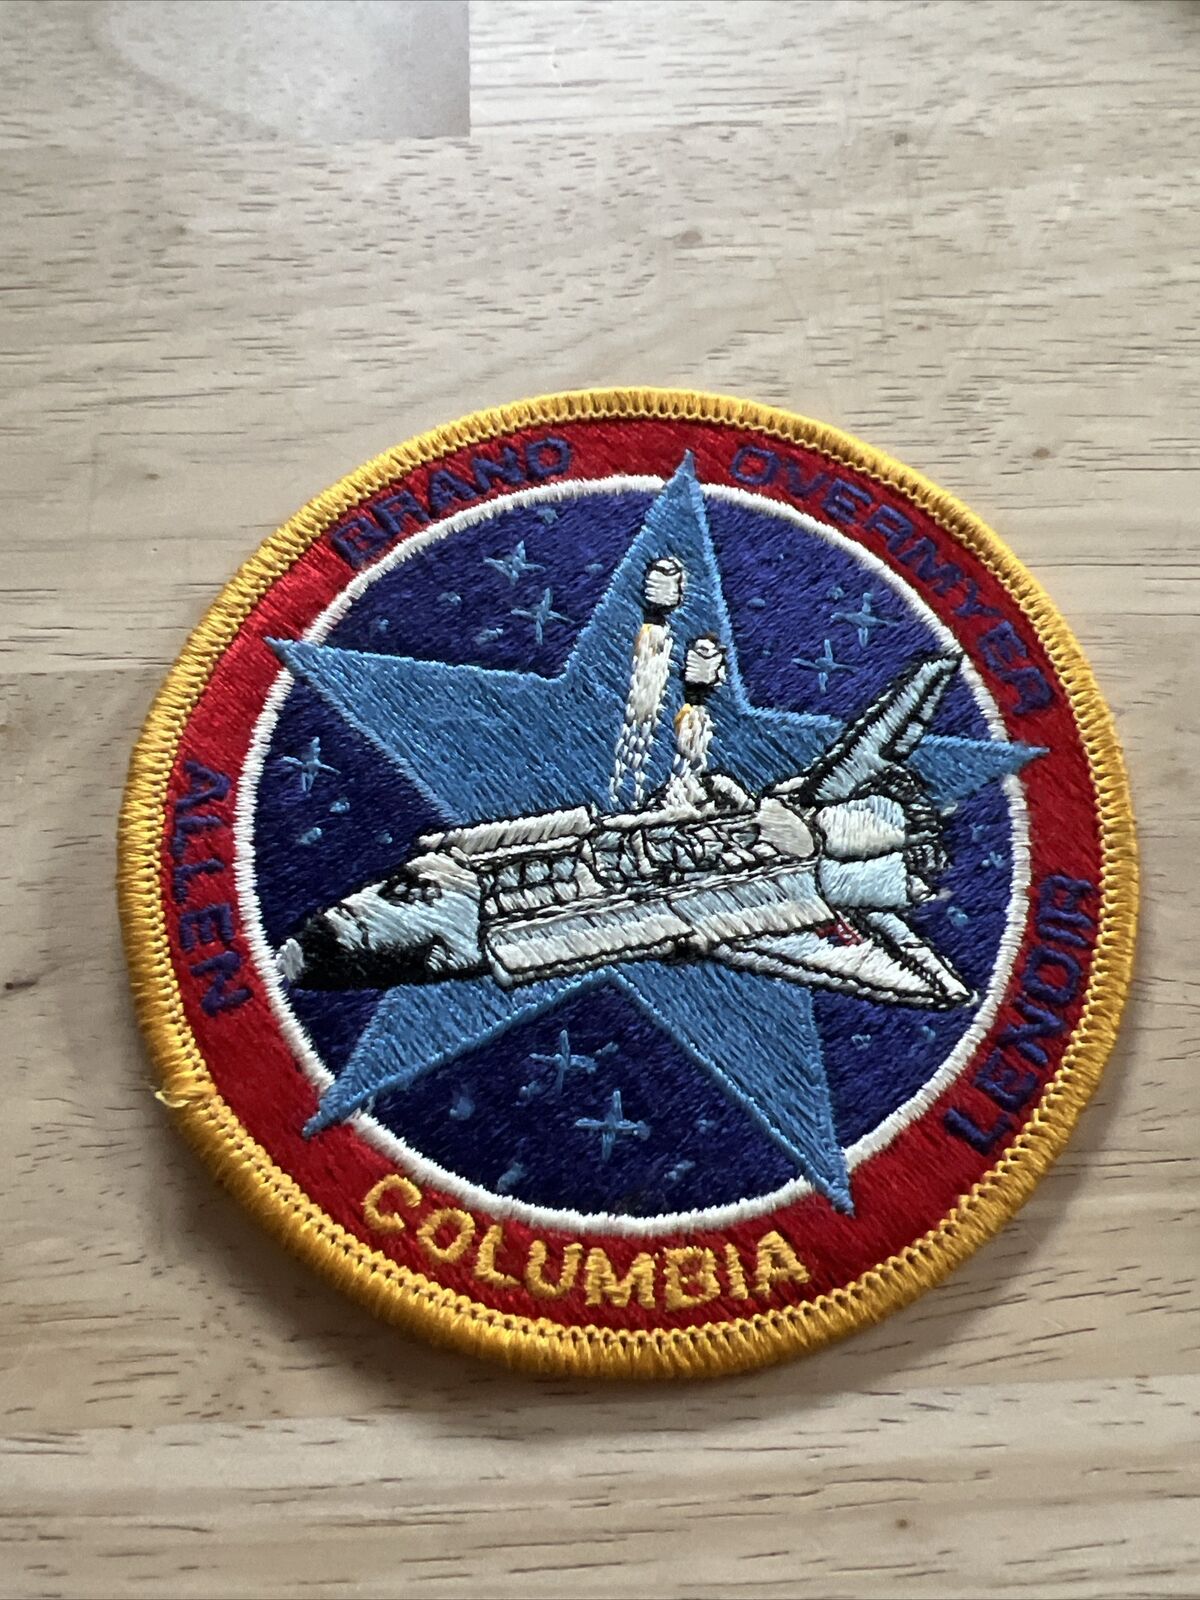 4 INCH VINTAGE PATCH COLUMBIA ALLEN BRAND OVERMYER AND LENOIA